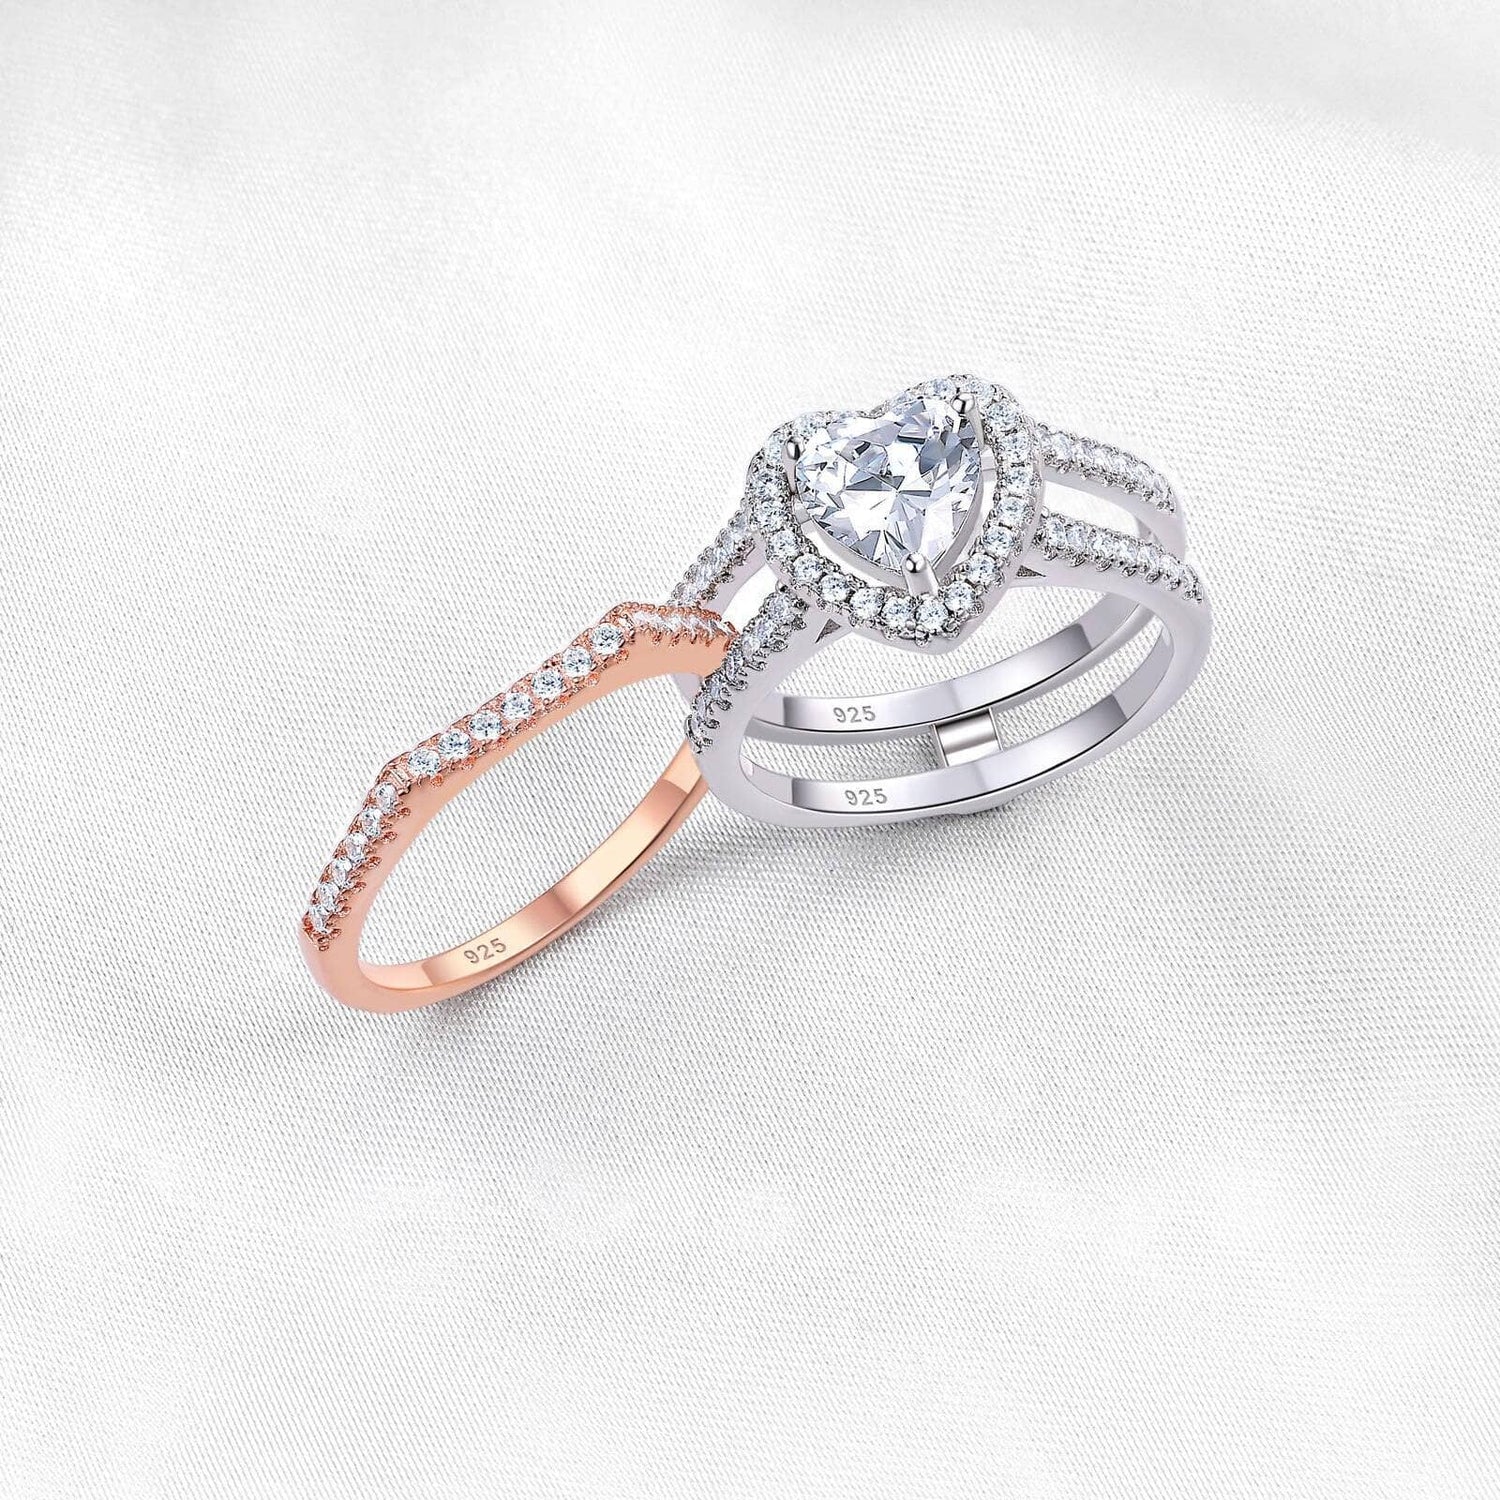 Diamond Double Heart Ring  Double heart ring, Romantic rings, Size 10 rings